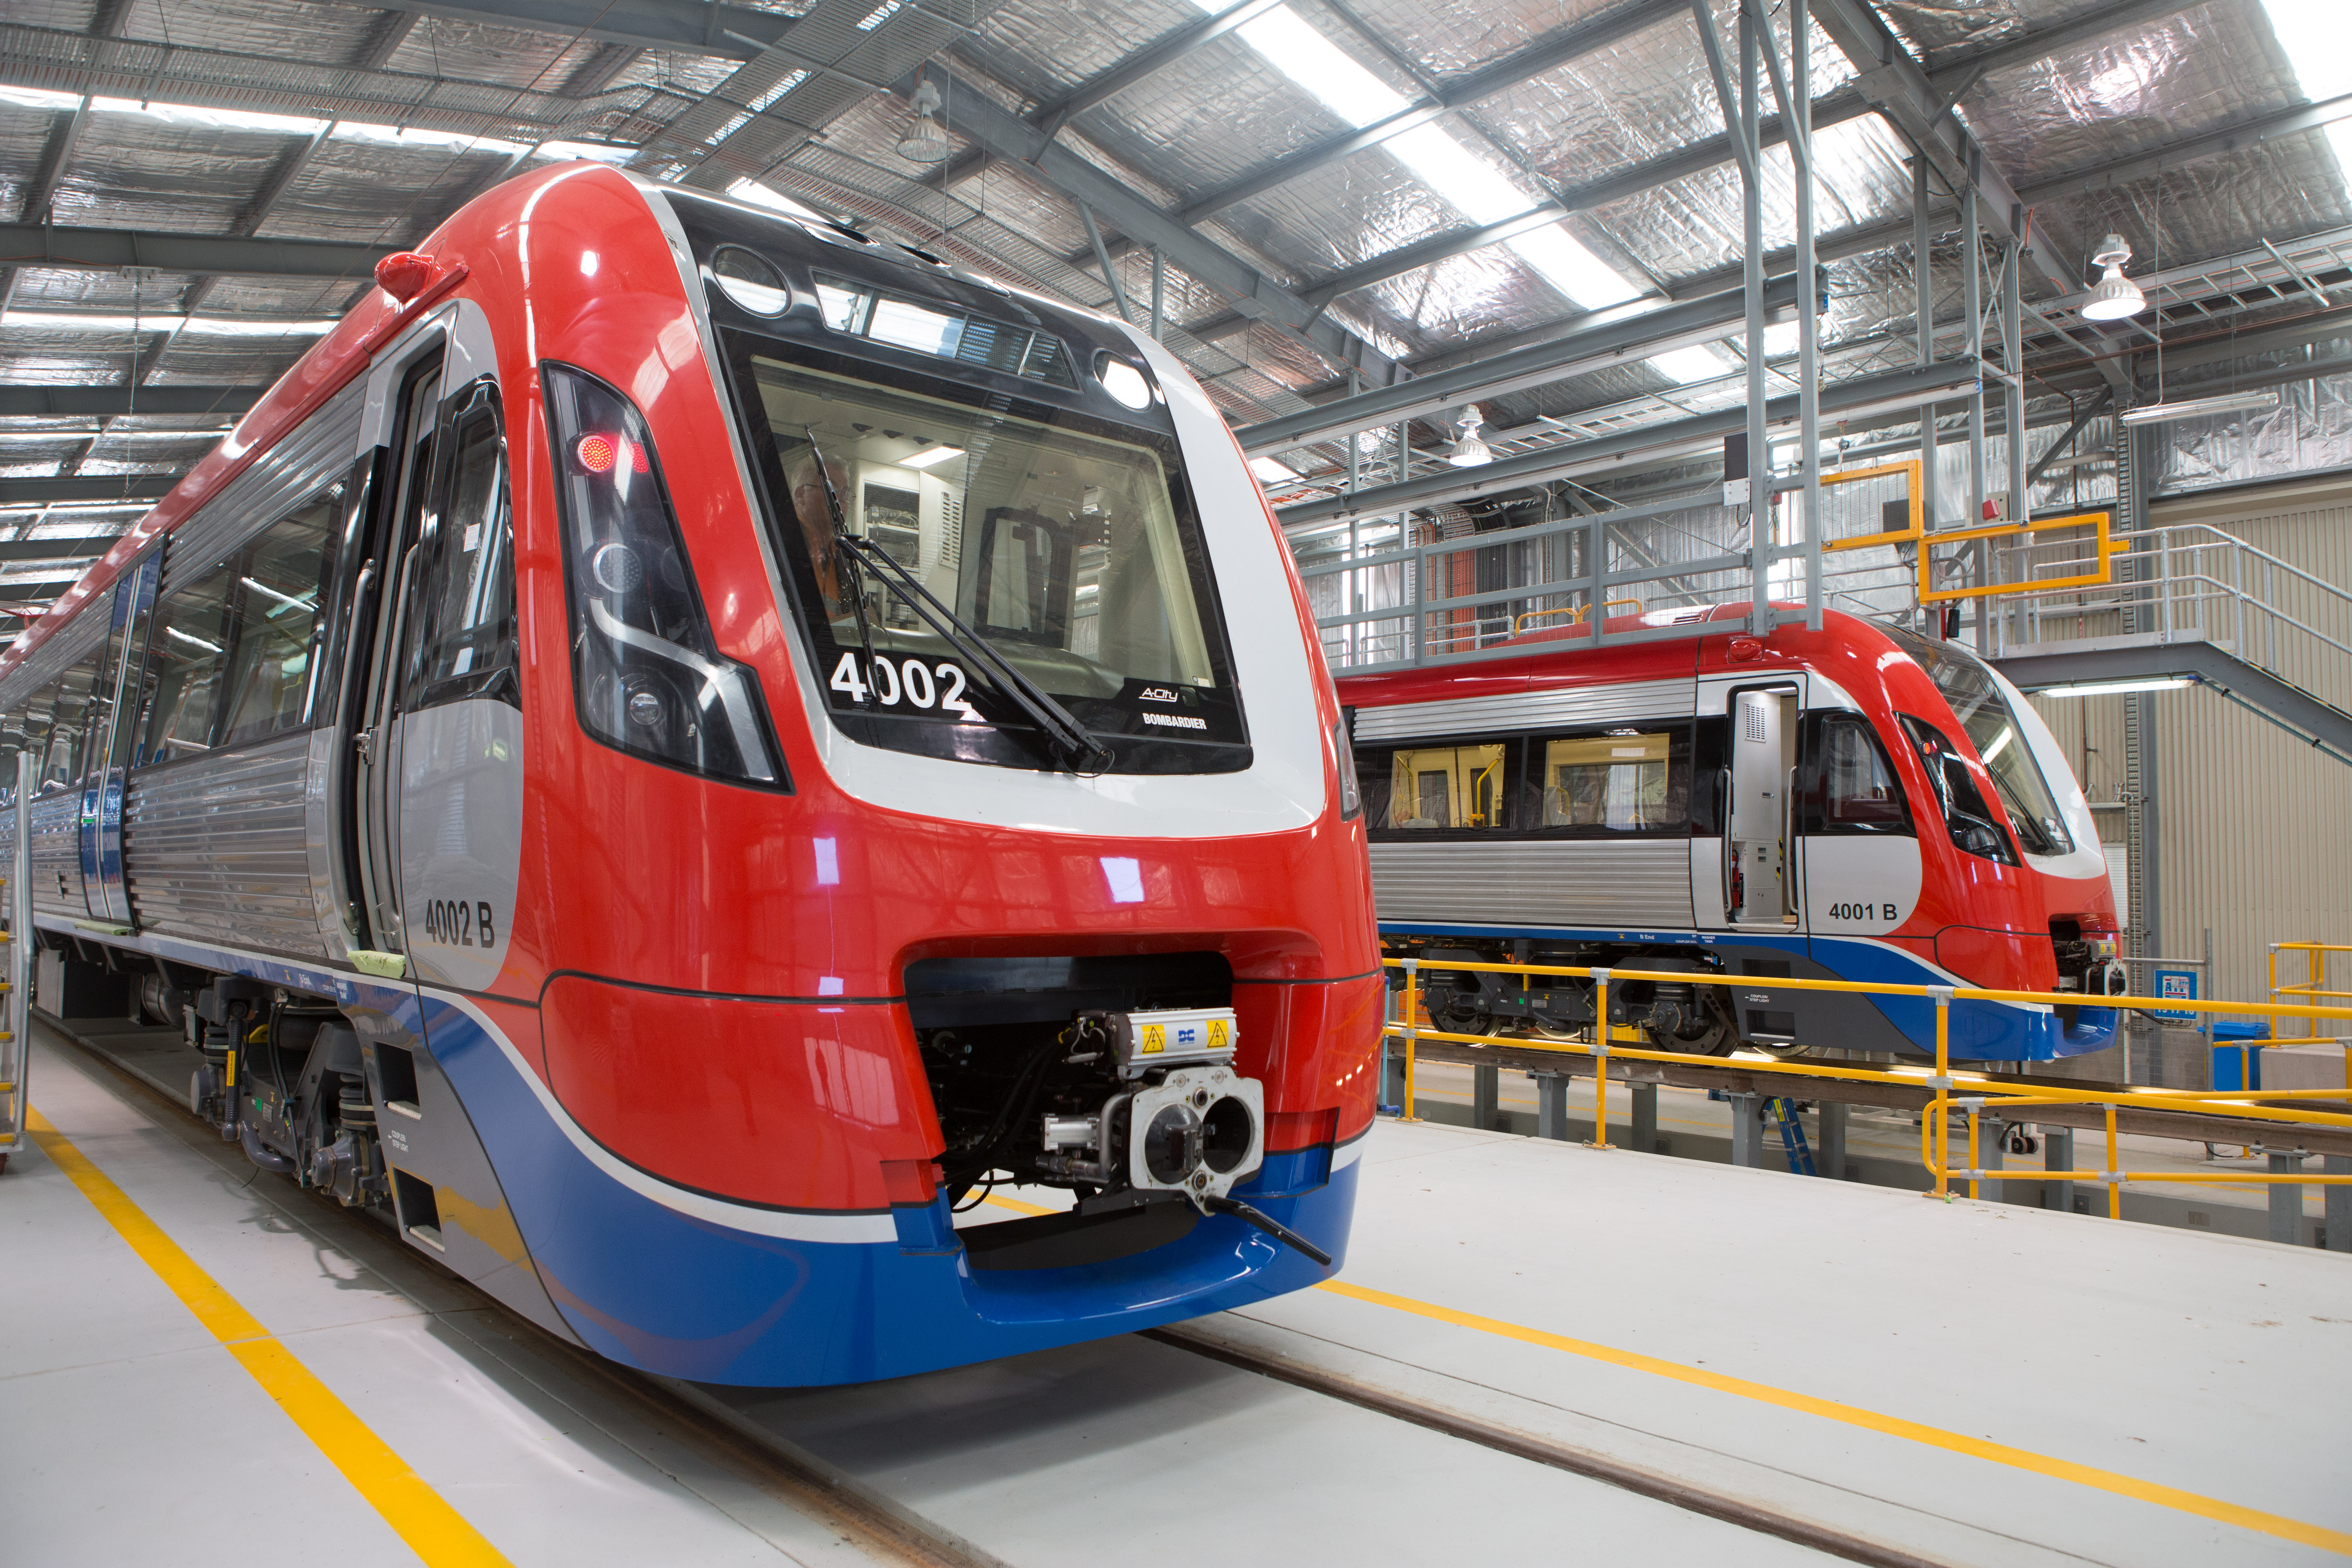 Bombardier wins order to supply 12 commuter trains for Adelaide, Australia2